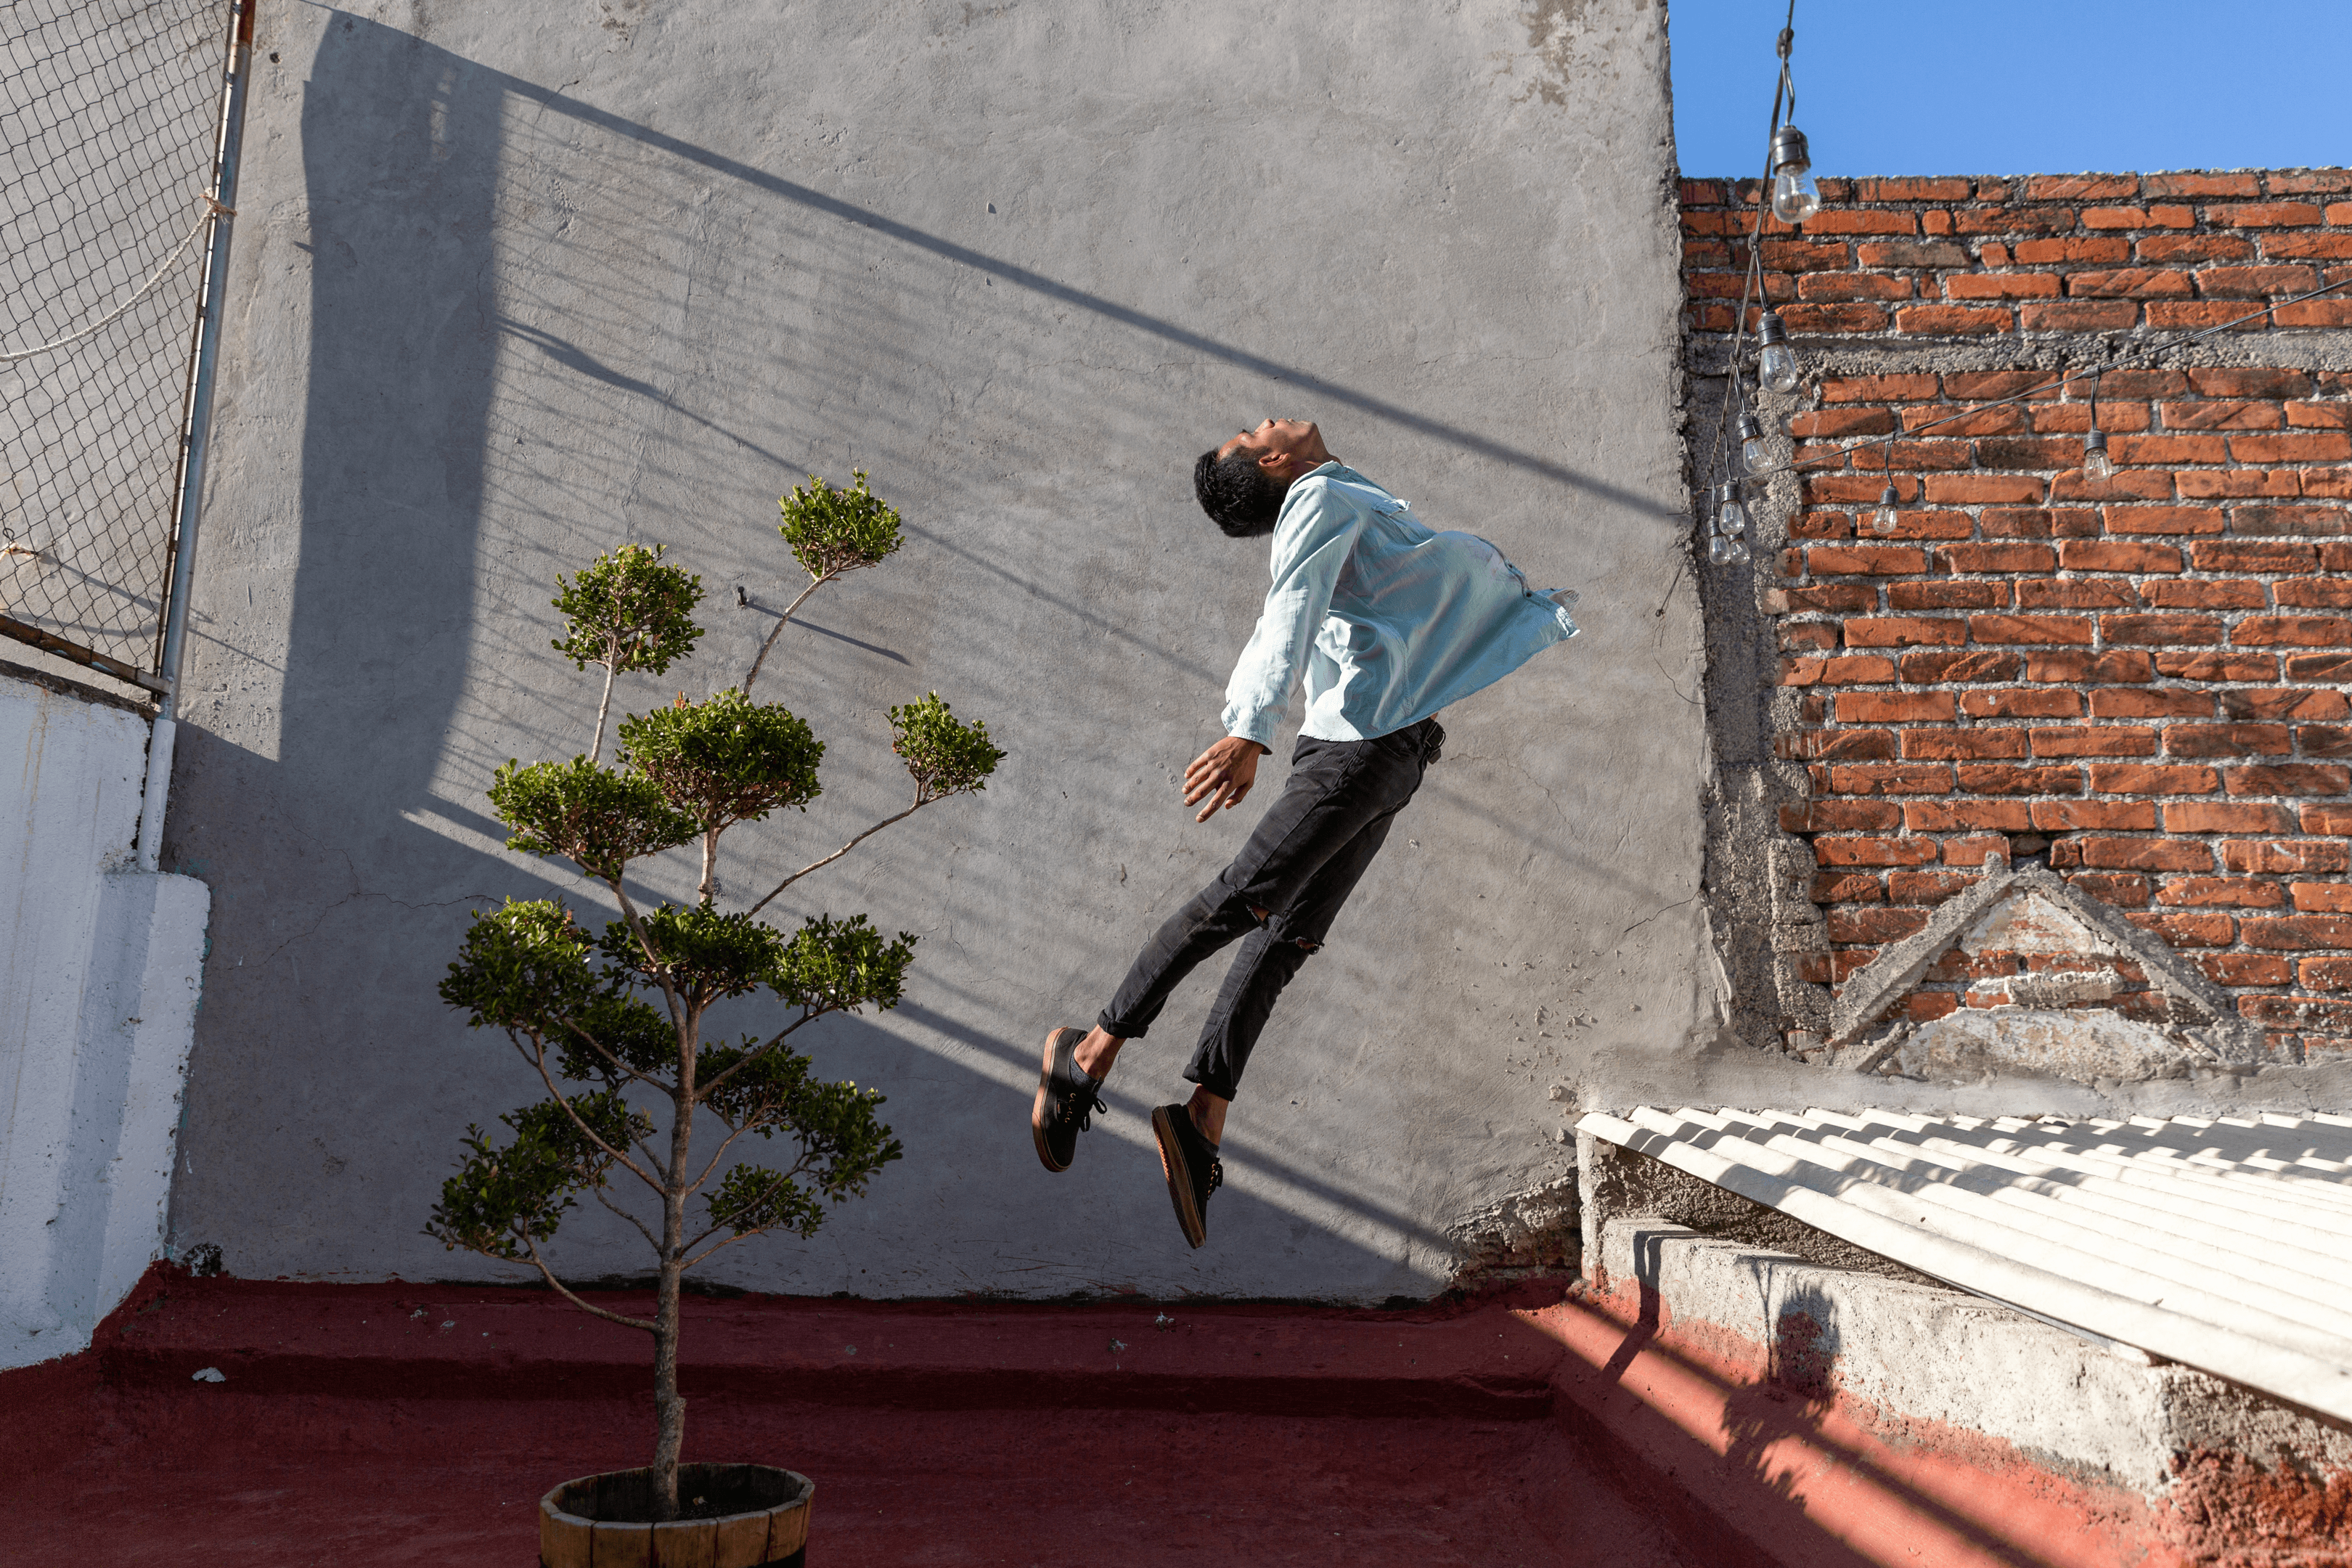 Dancers on Rooftops #98 - Baruk (Mexico, 2022)